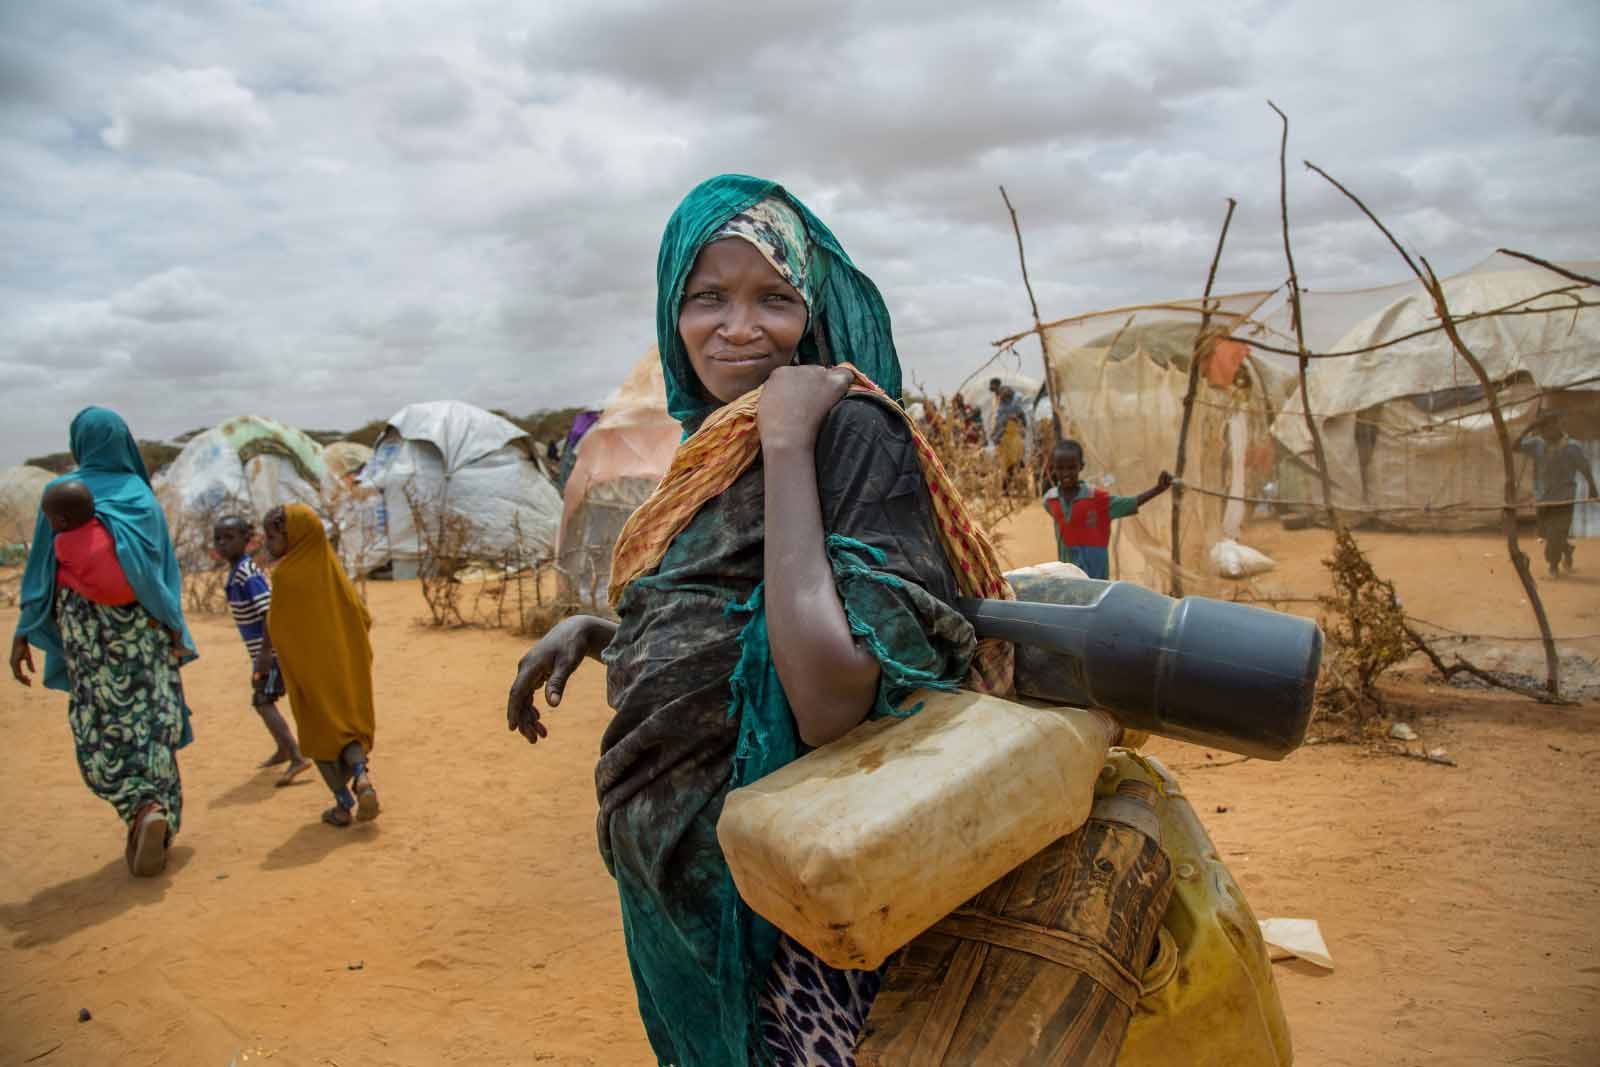 A photo on the Everyday Climate Change Instagram feed shows a Somali woman walking to collect water in Kapasa IDP Camp in Jubaland in June 2017. Photo by Georgina Goodwin